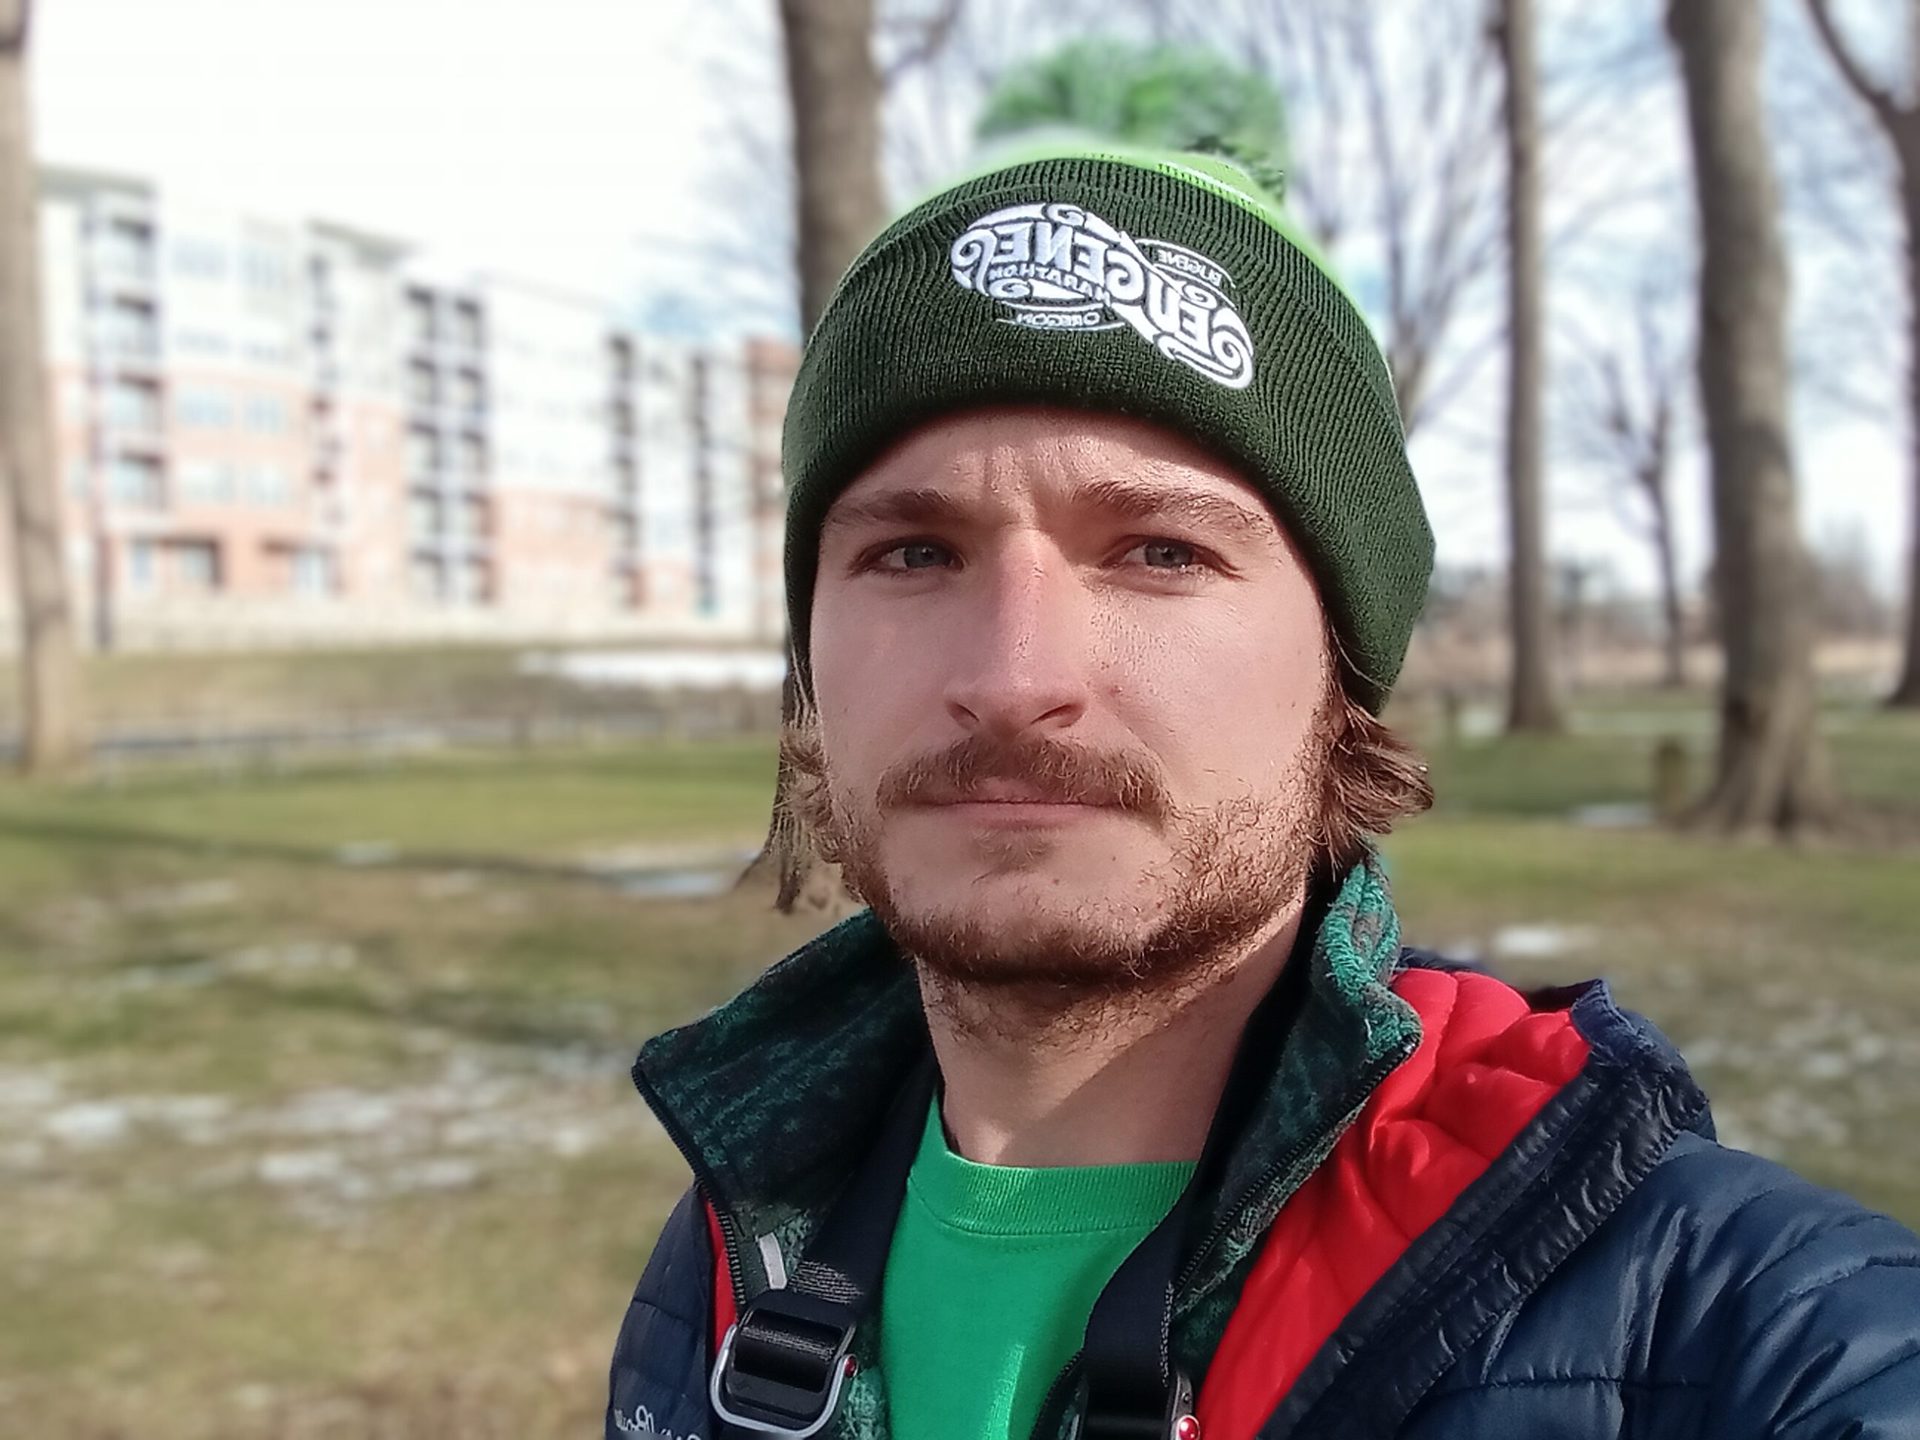 galaxy a03s portrait selfie outdoors of a man with facial hair wearing a green hat, green t-shirt, and red and black coat, with buildings and trees visible behind him.